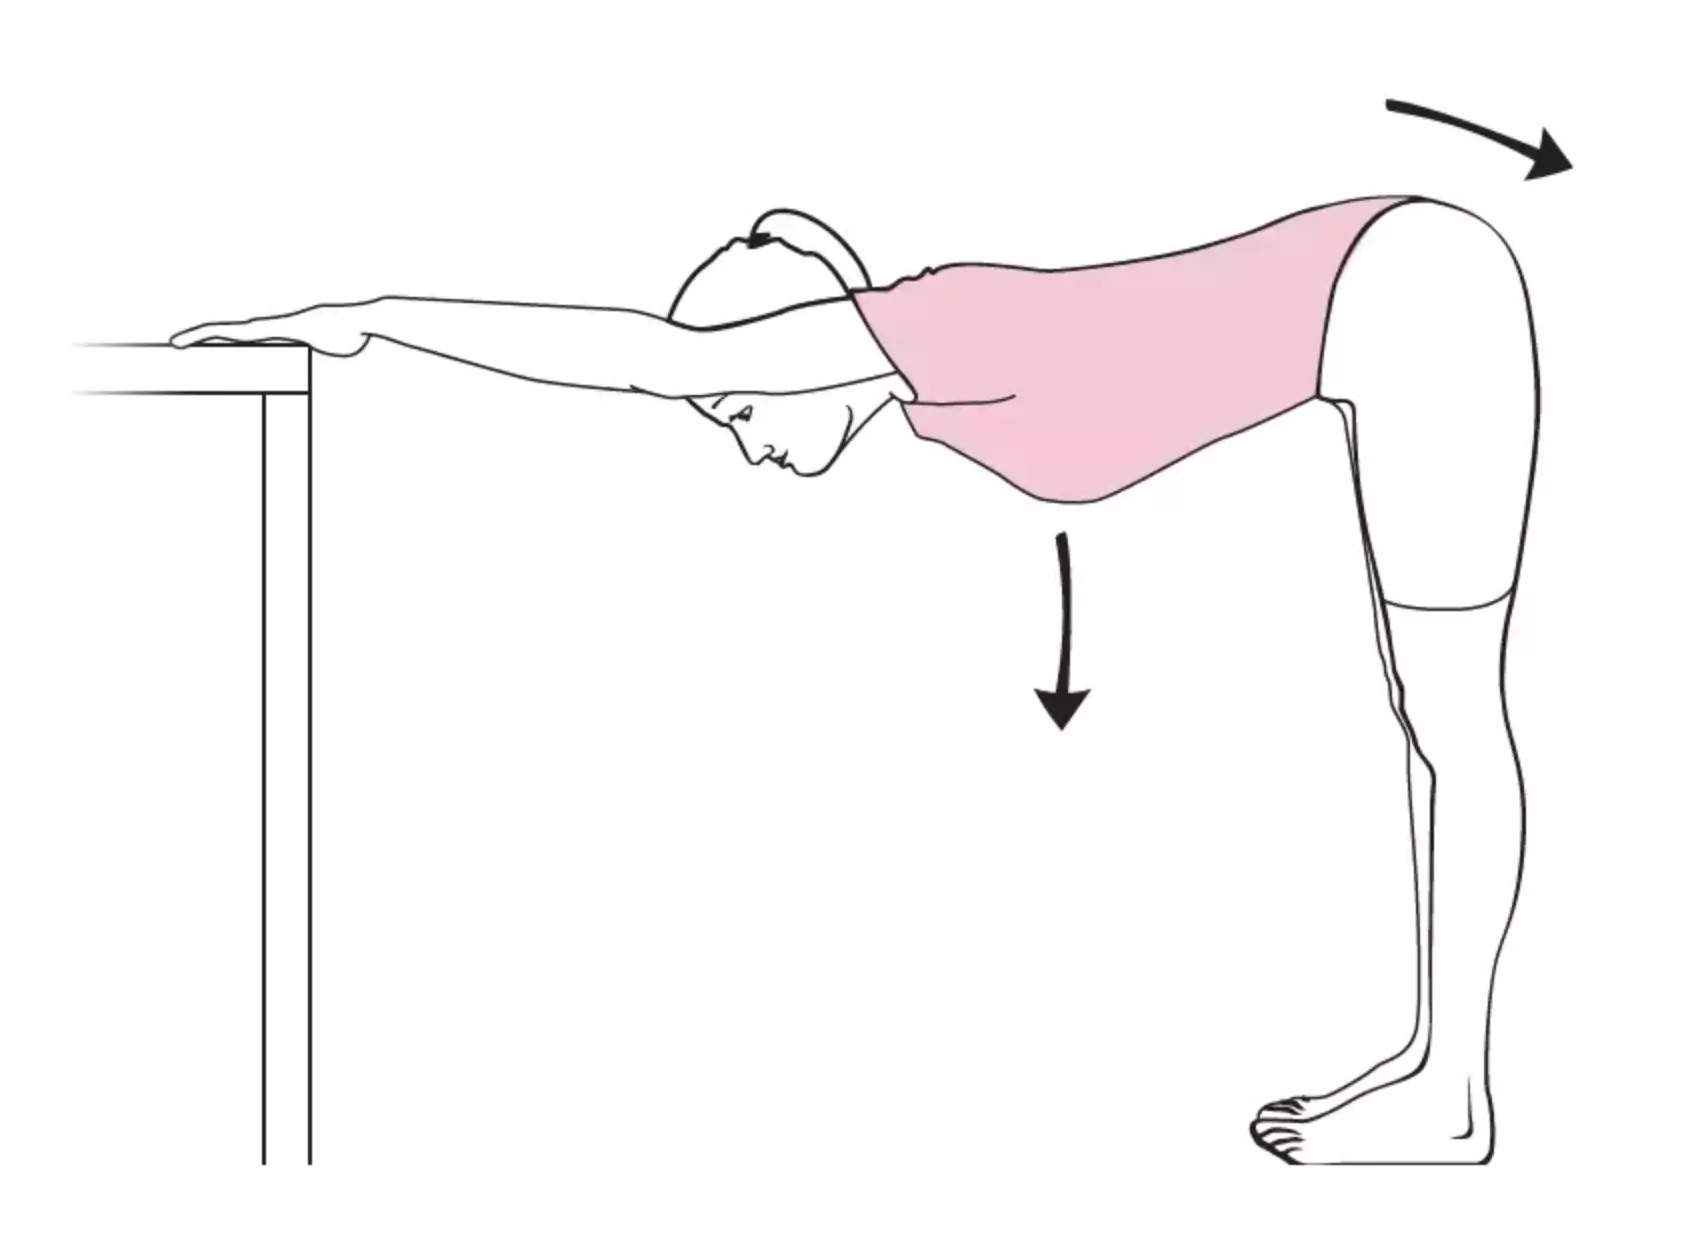 Passive stretching: with hands or forearms resting on a table, slowly move backwards without moving them, lowering the buttocks. Repeat 5 to 10 times.